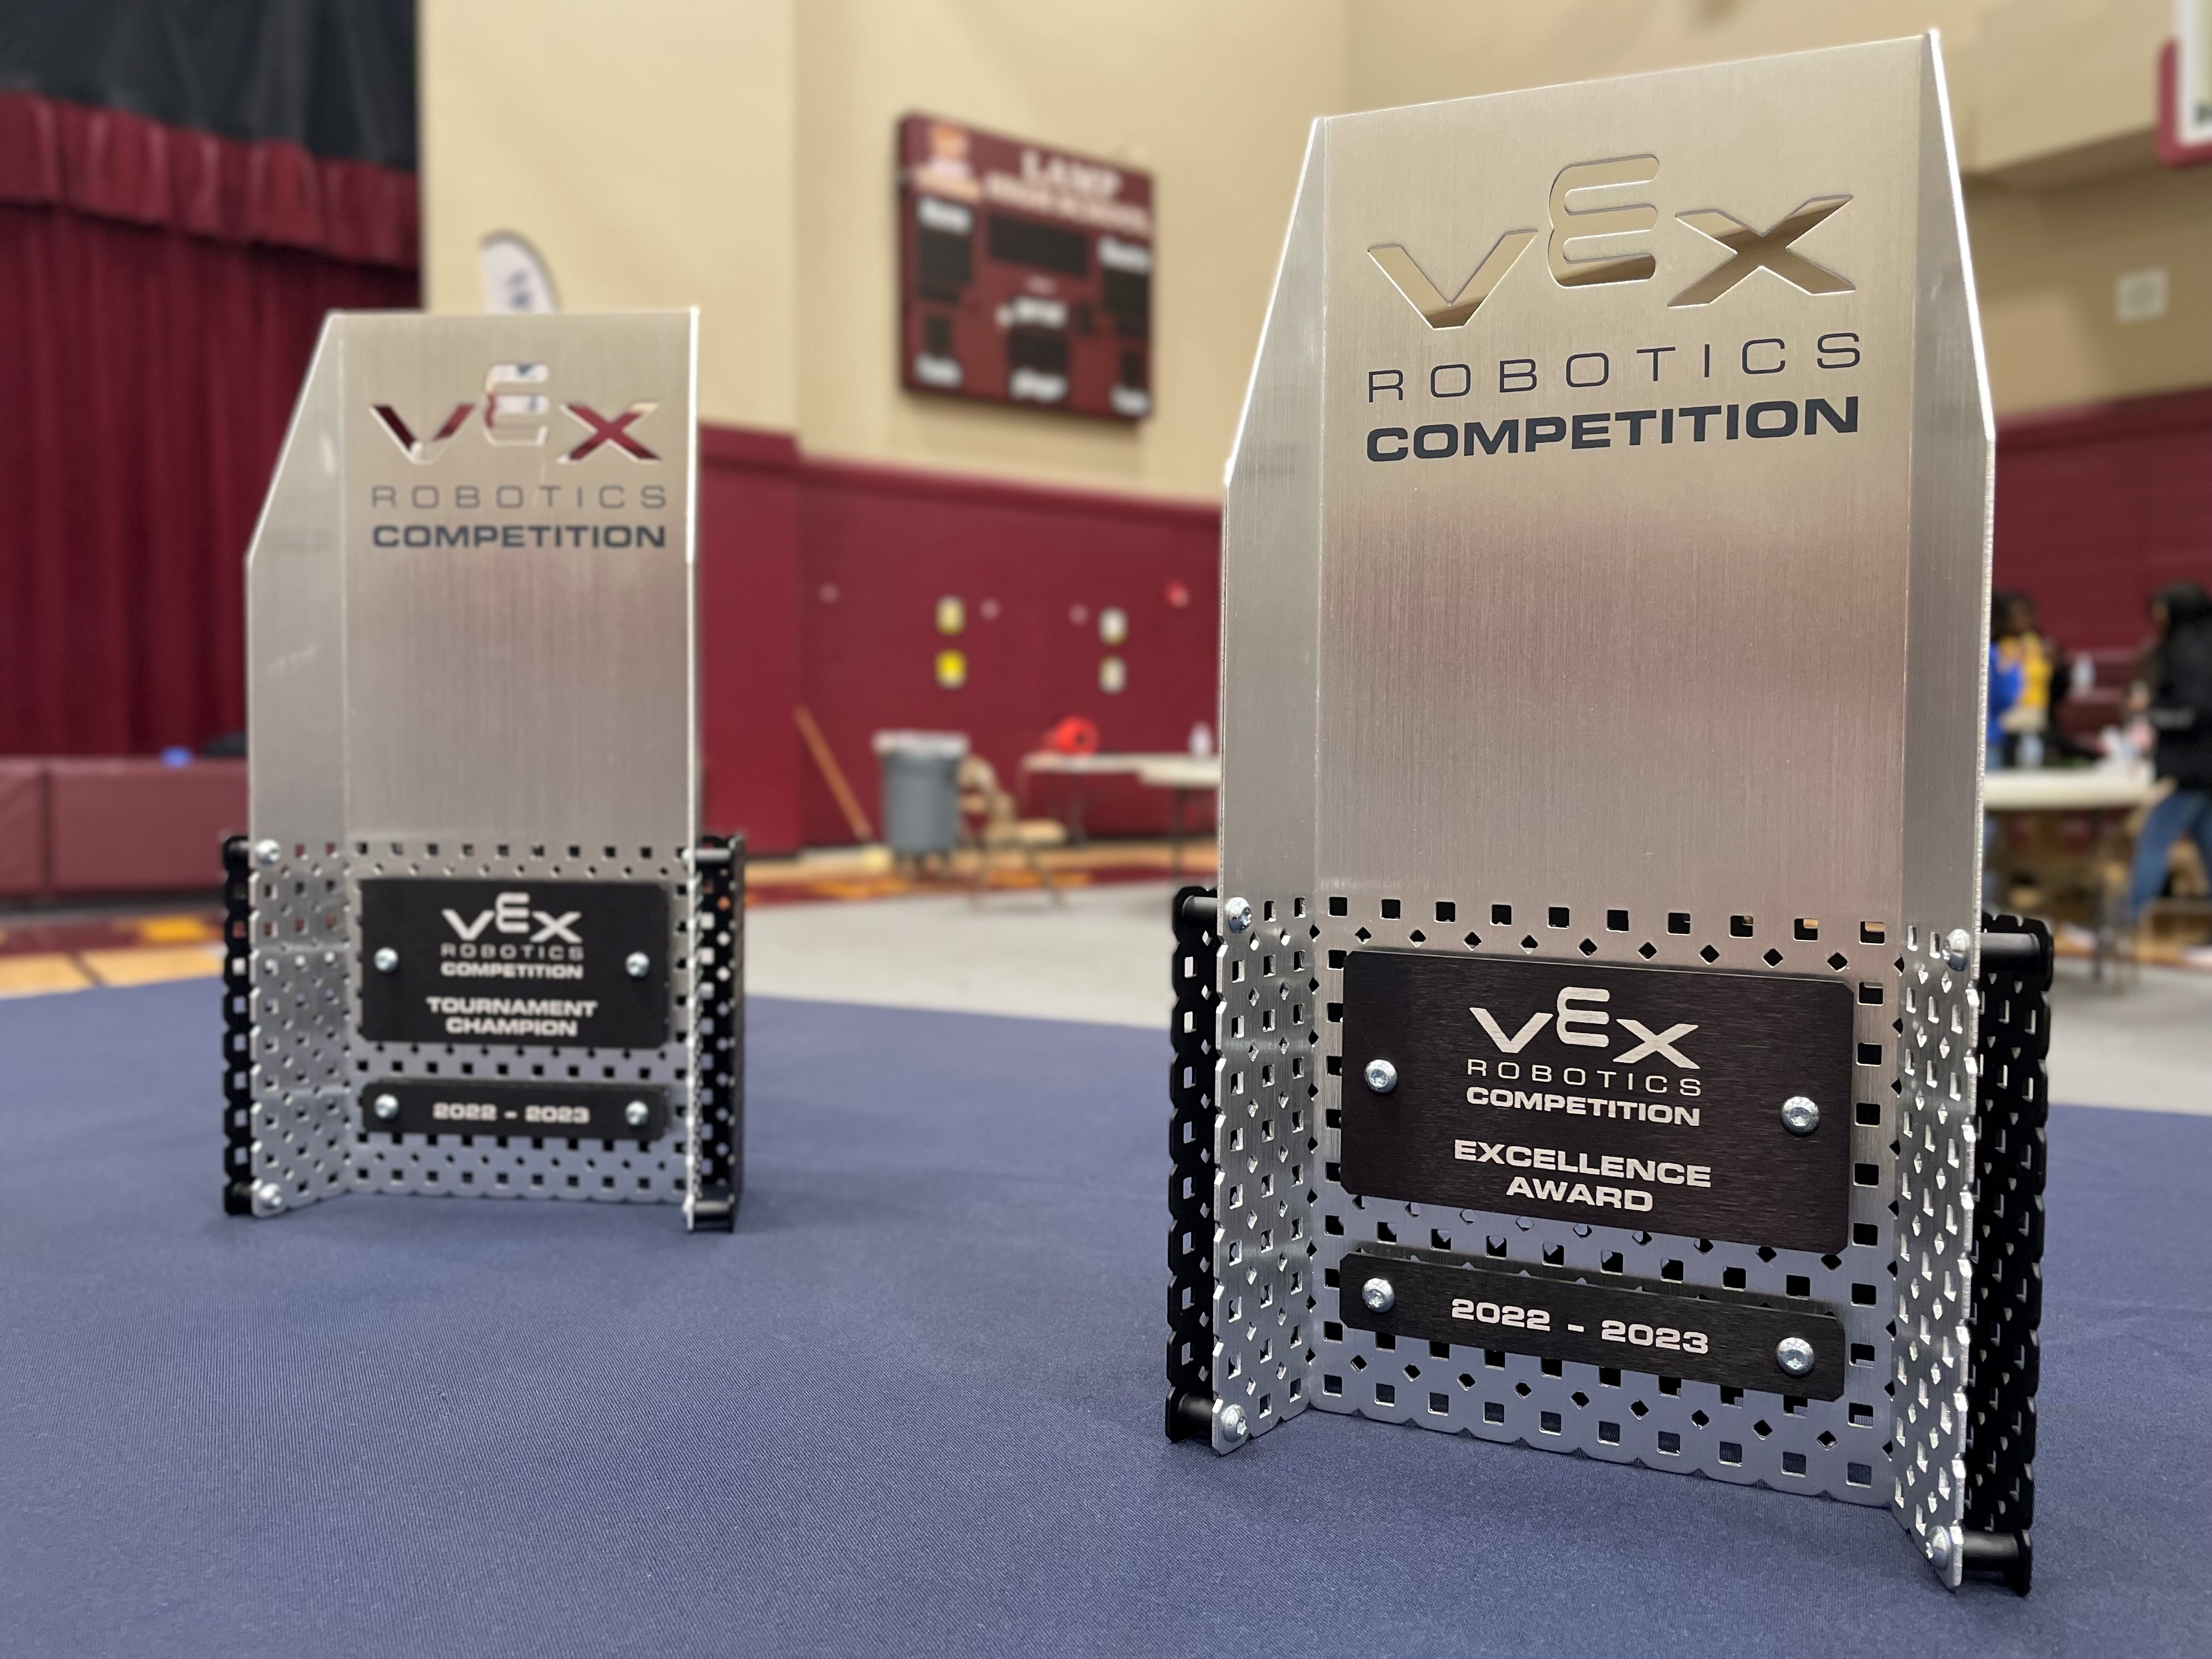 Student teams compete for various VEX robotics awards and bragging rights in HIRE’s first high school tournament.